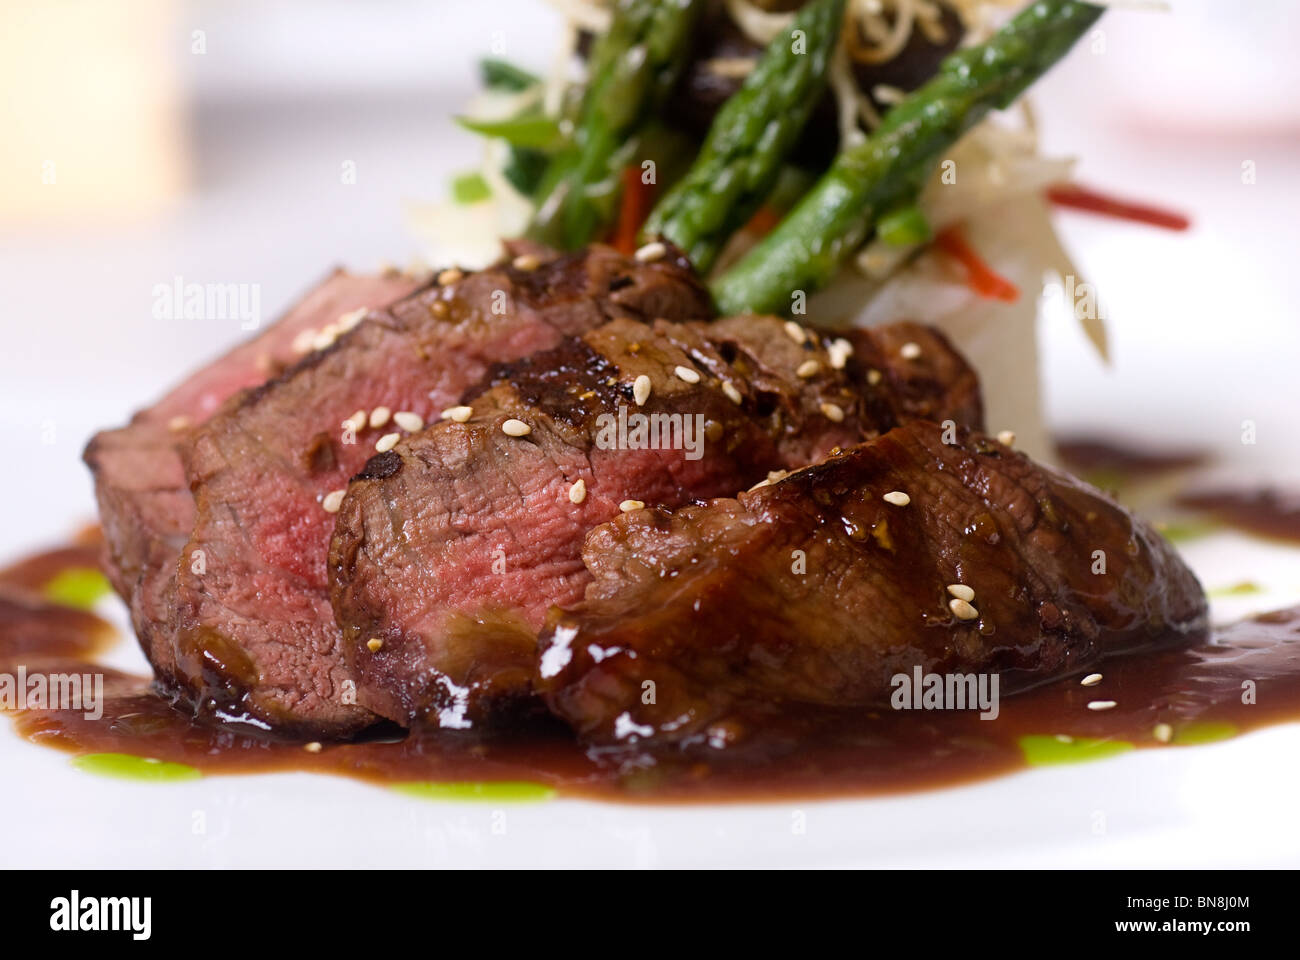 Fine dining restaurant meal of fillet mignon Stock Photo